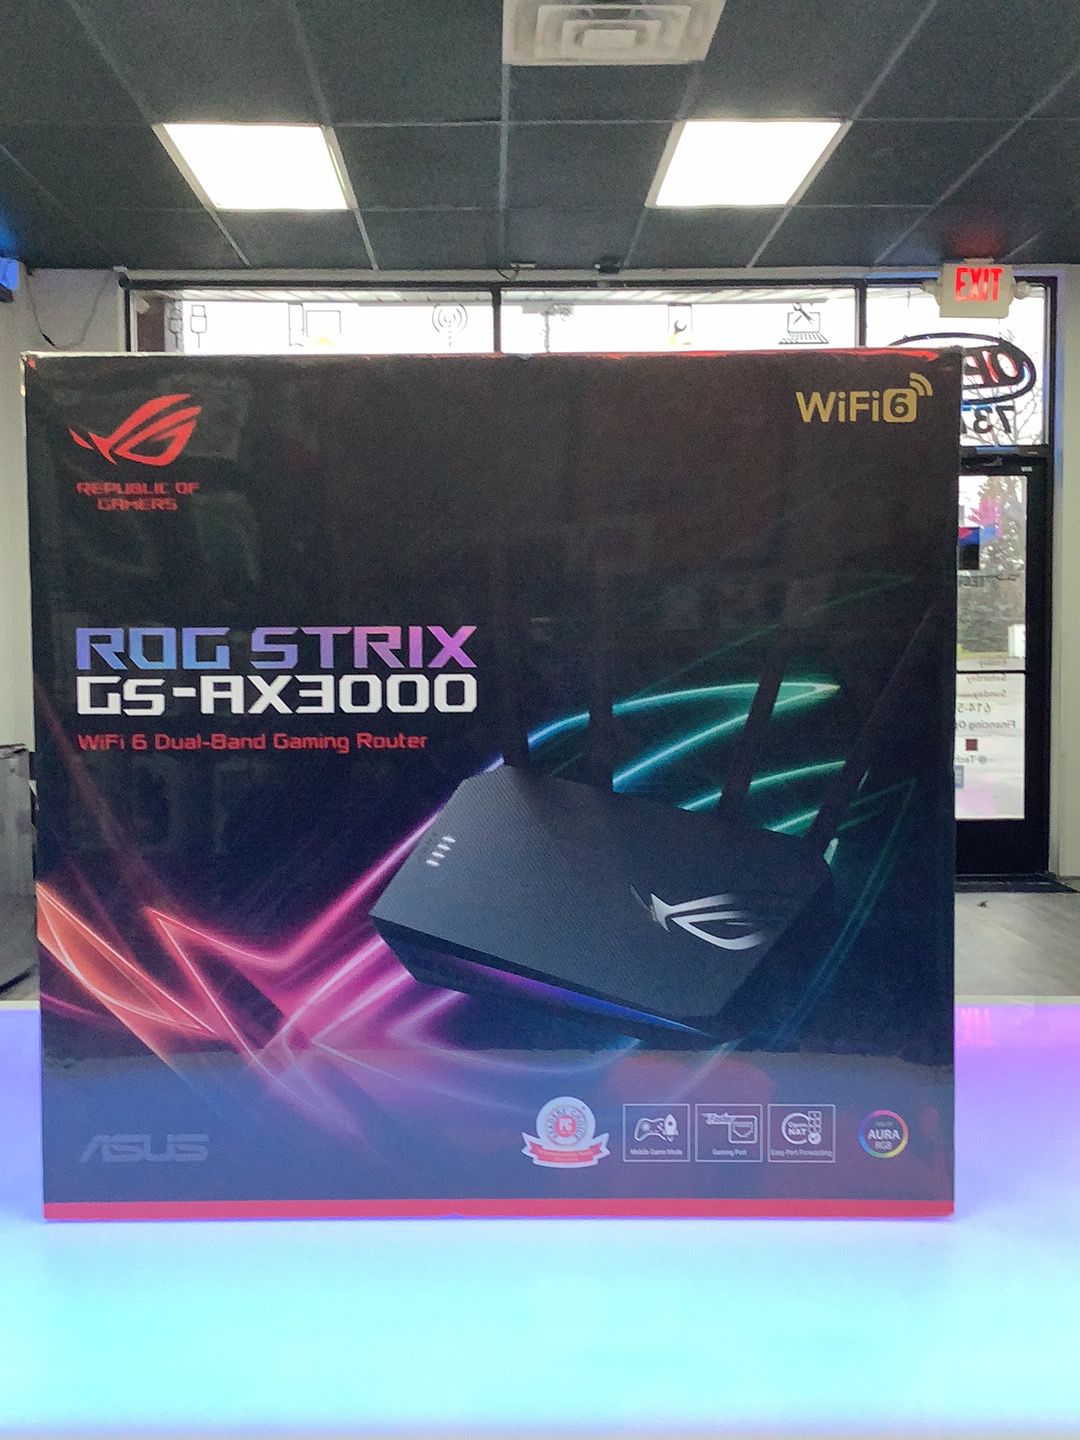 Asus Rog Strix GS-AX3000 WiFi 6 Dual-Band Gaming Router - Brand New